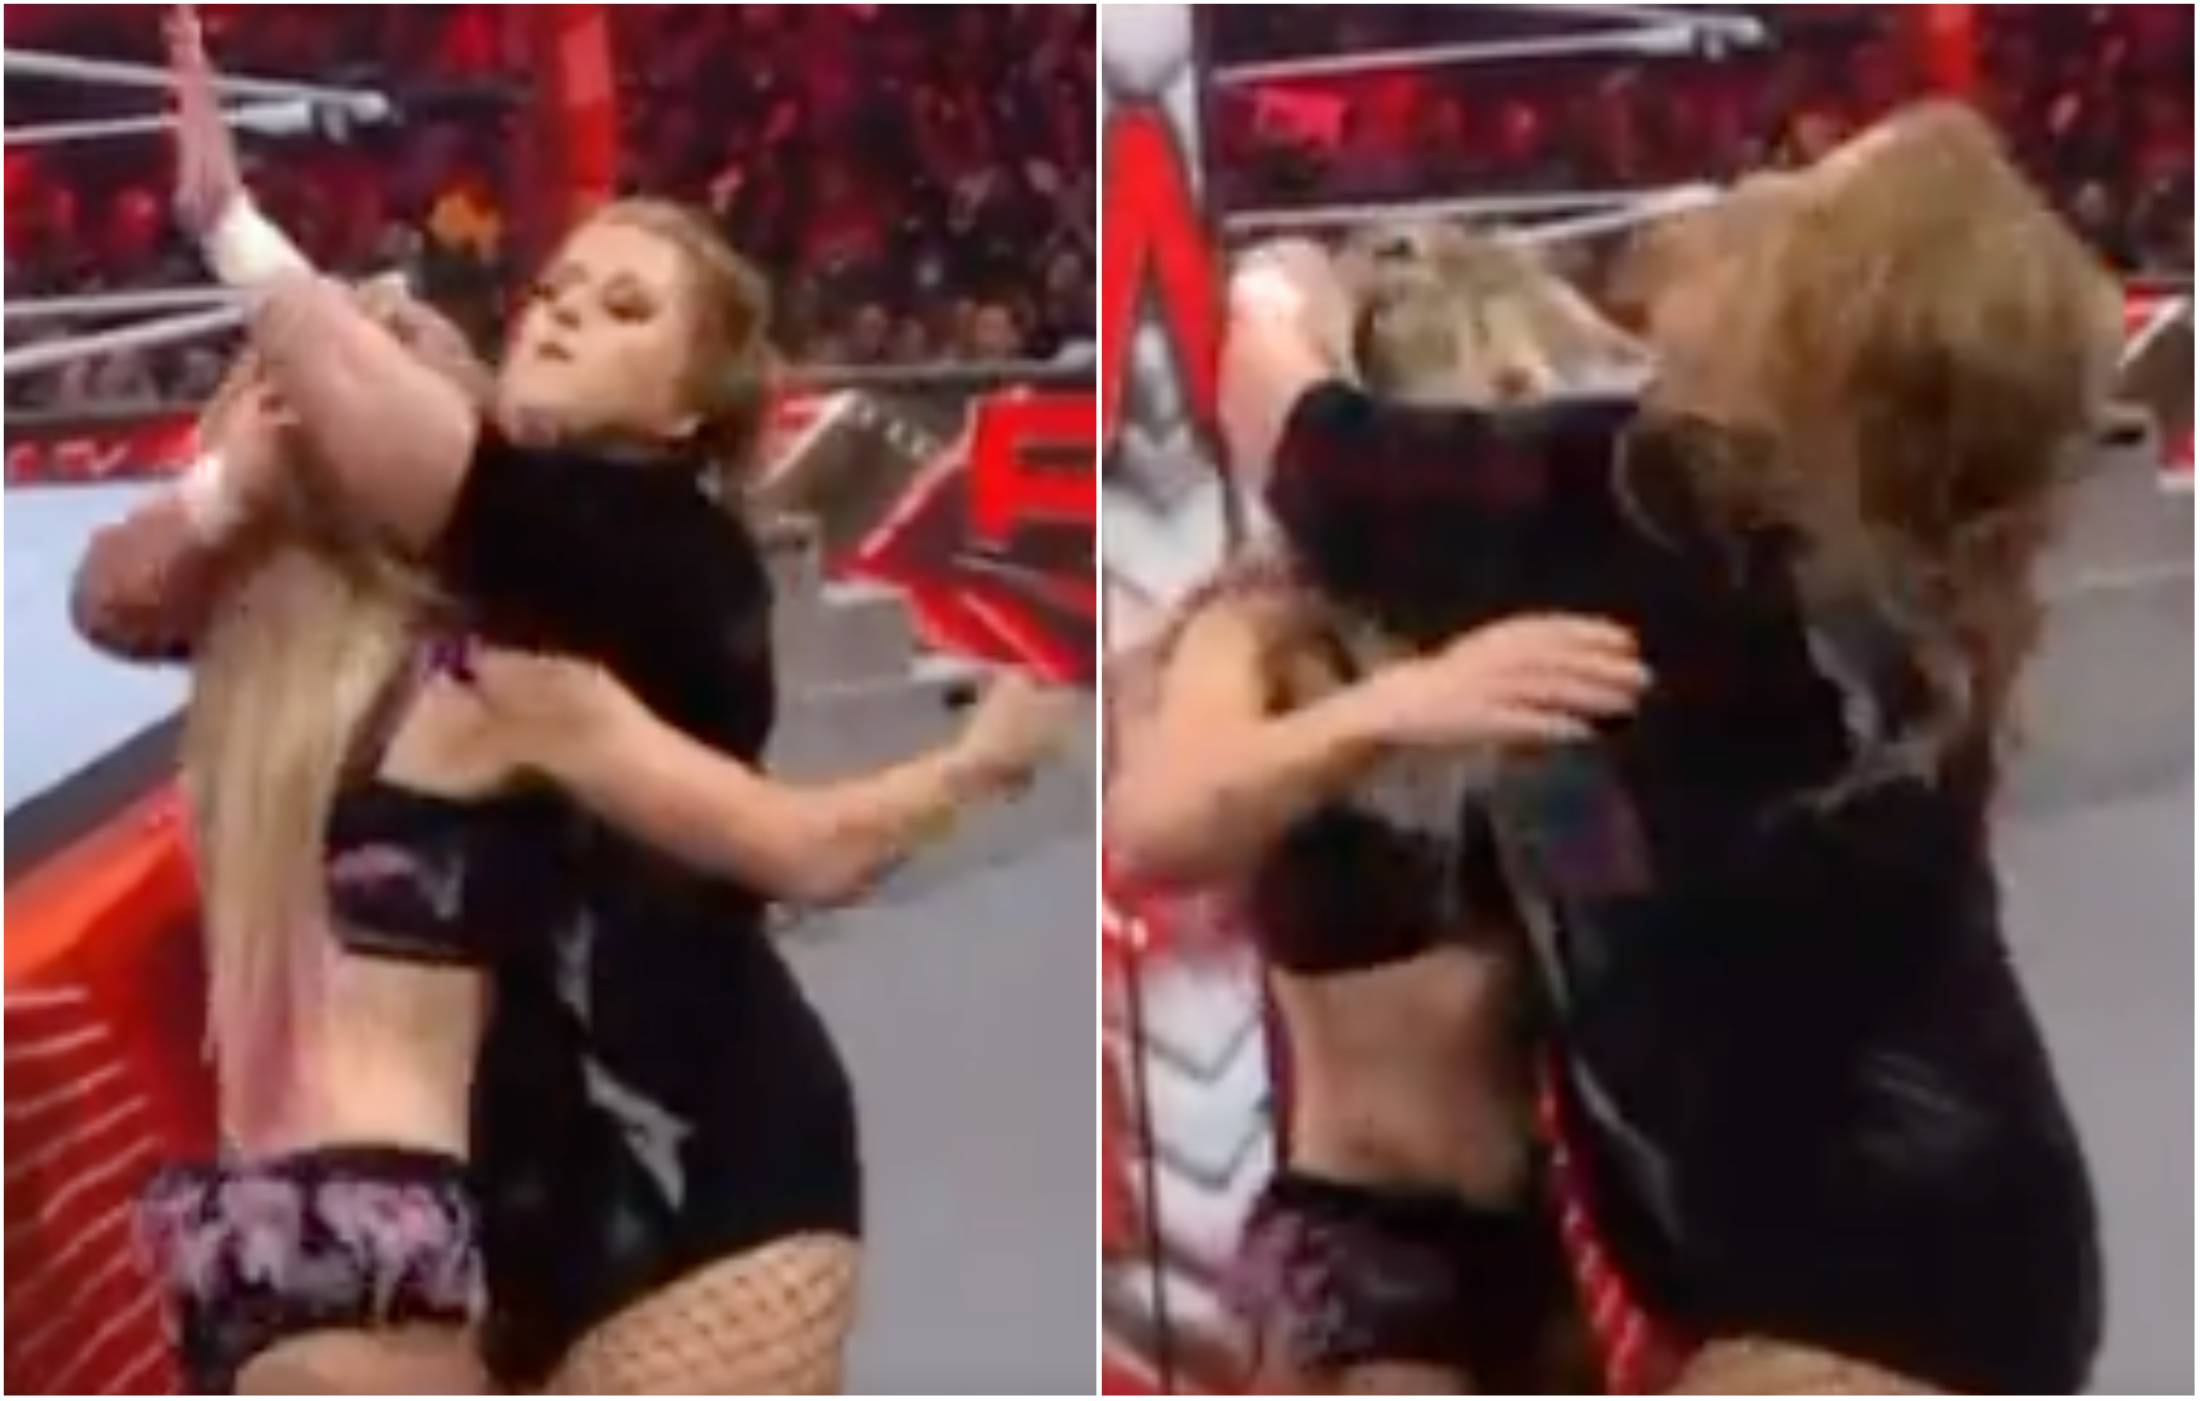 Doudrop proved she one of WWE's safest workers this week